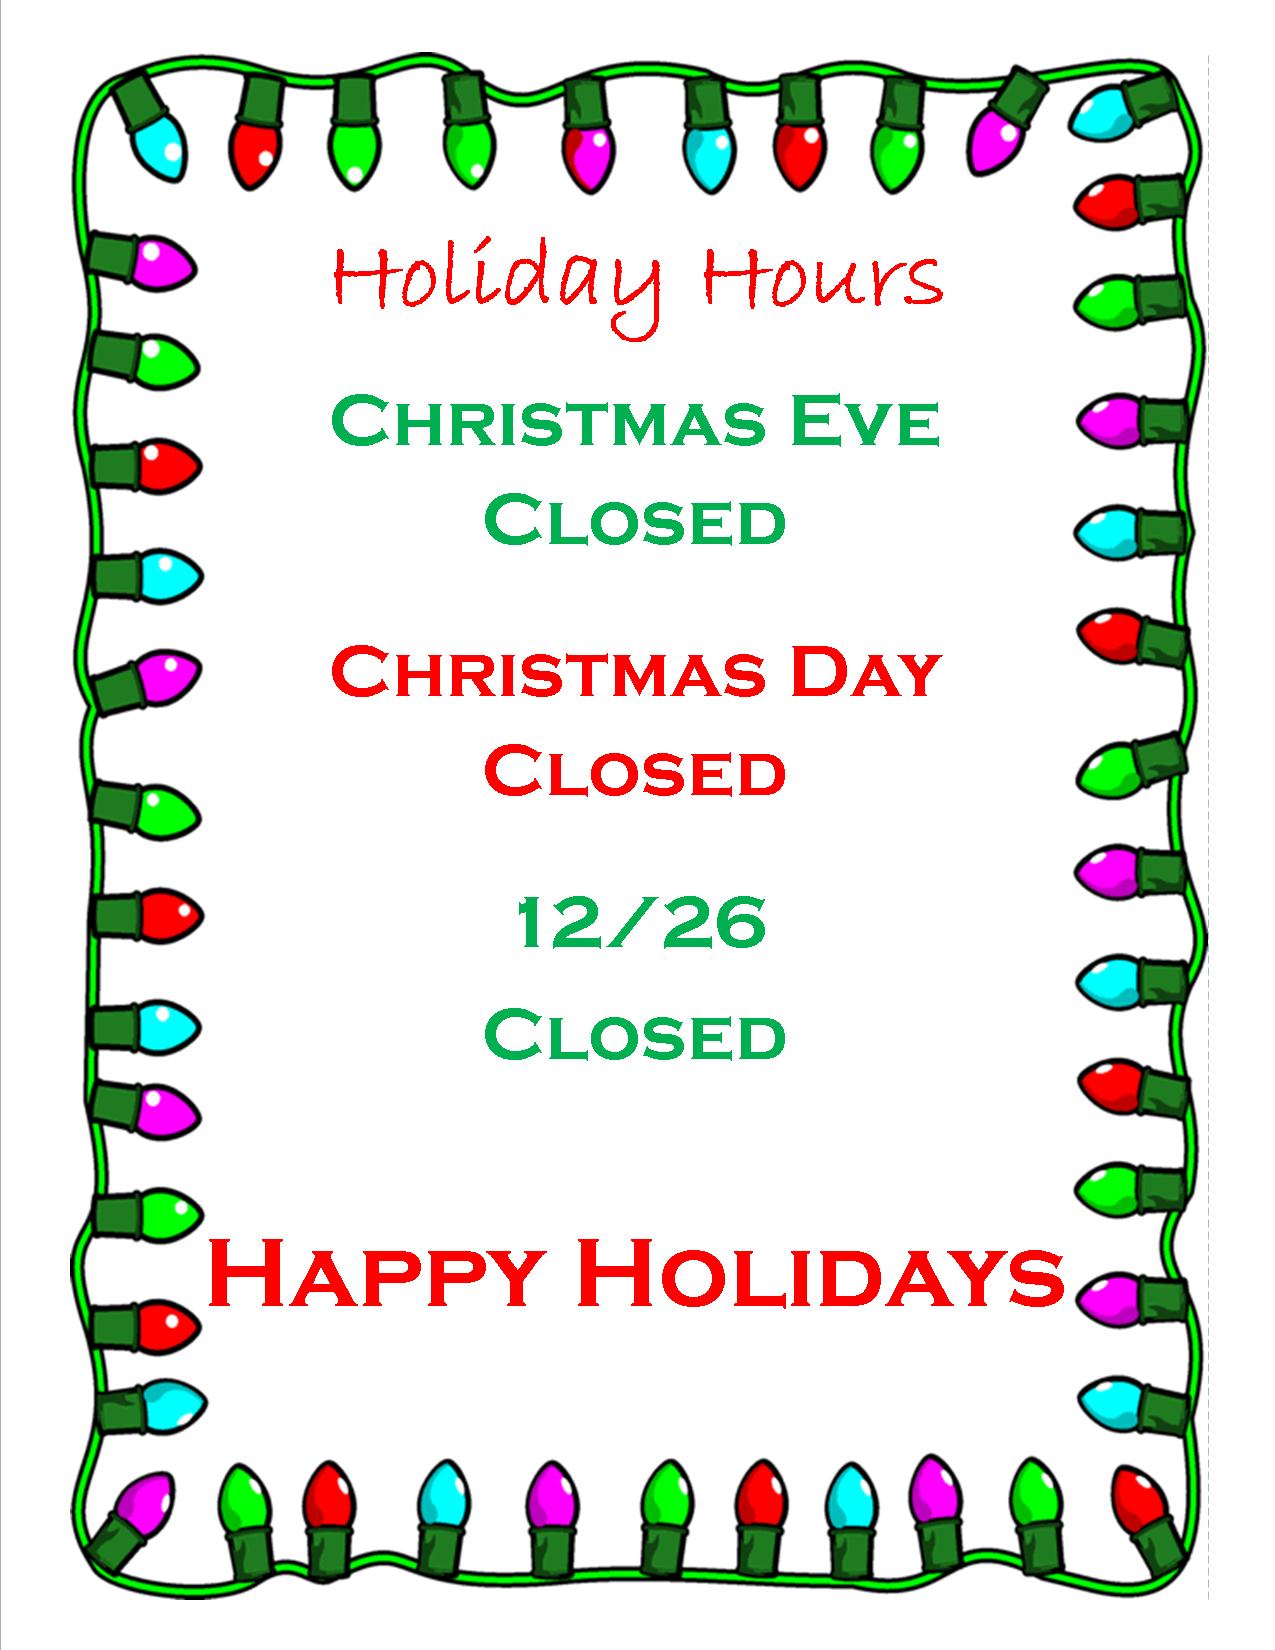 business-office-closed-for-holidays-keizer-fire-district-keizer-fire